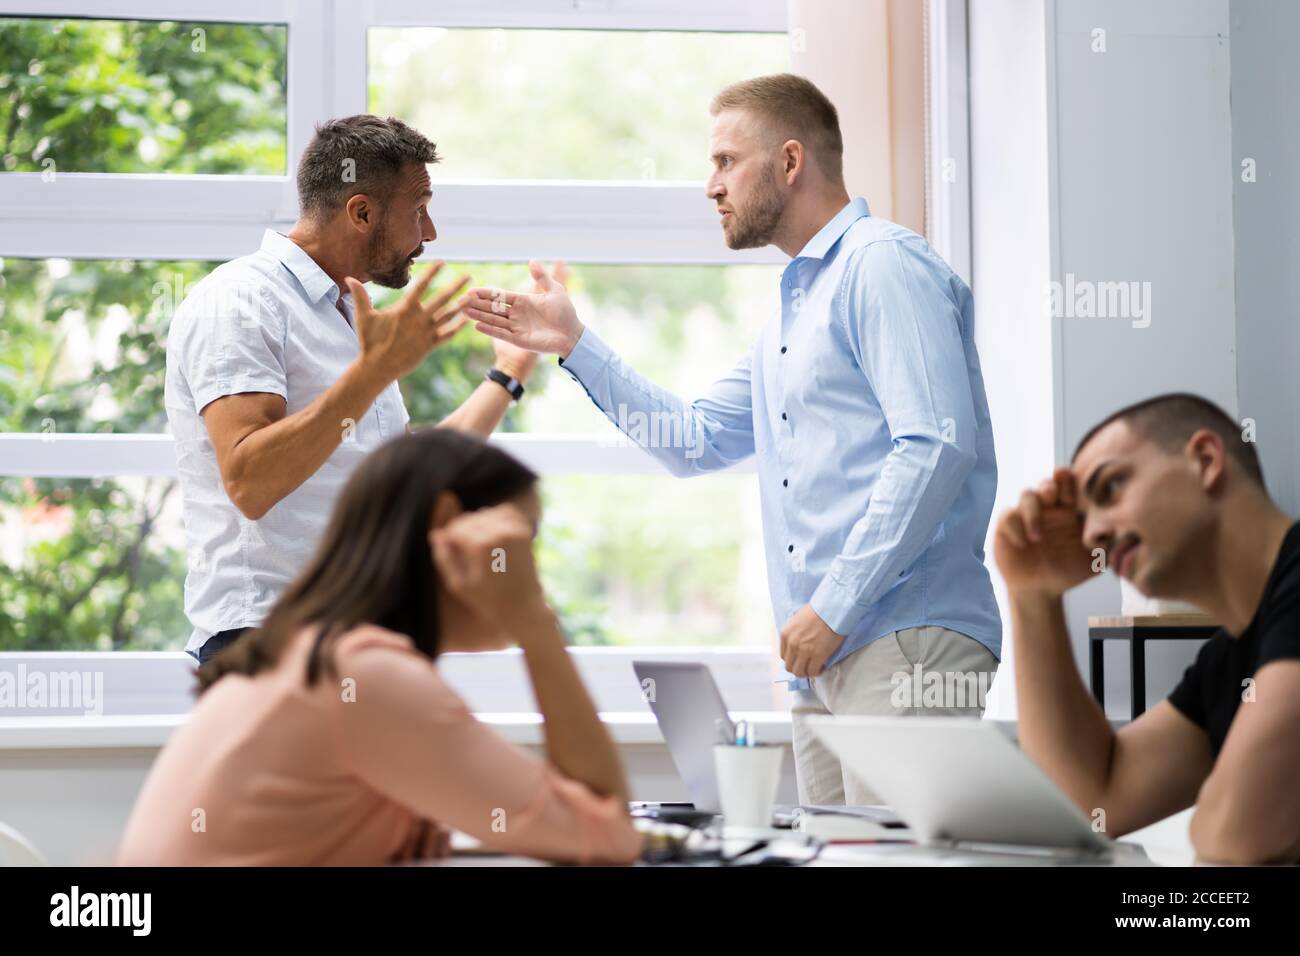 Pressure At Workplace In Office. Bully Boss Conflict Stock Photo - Alamy